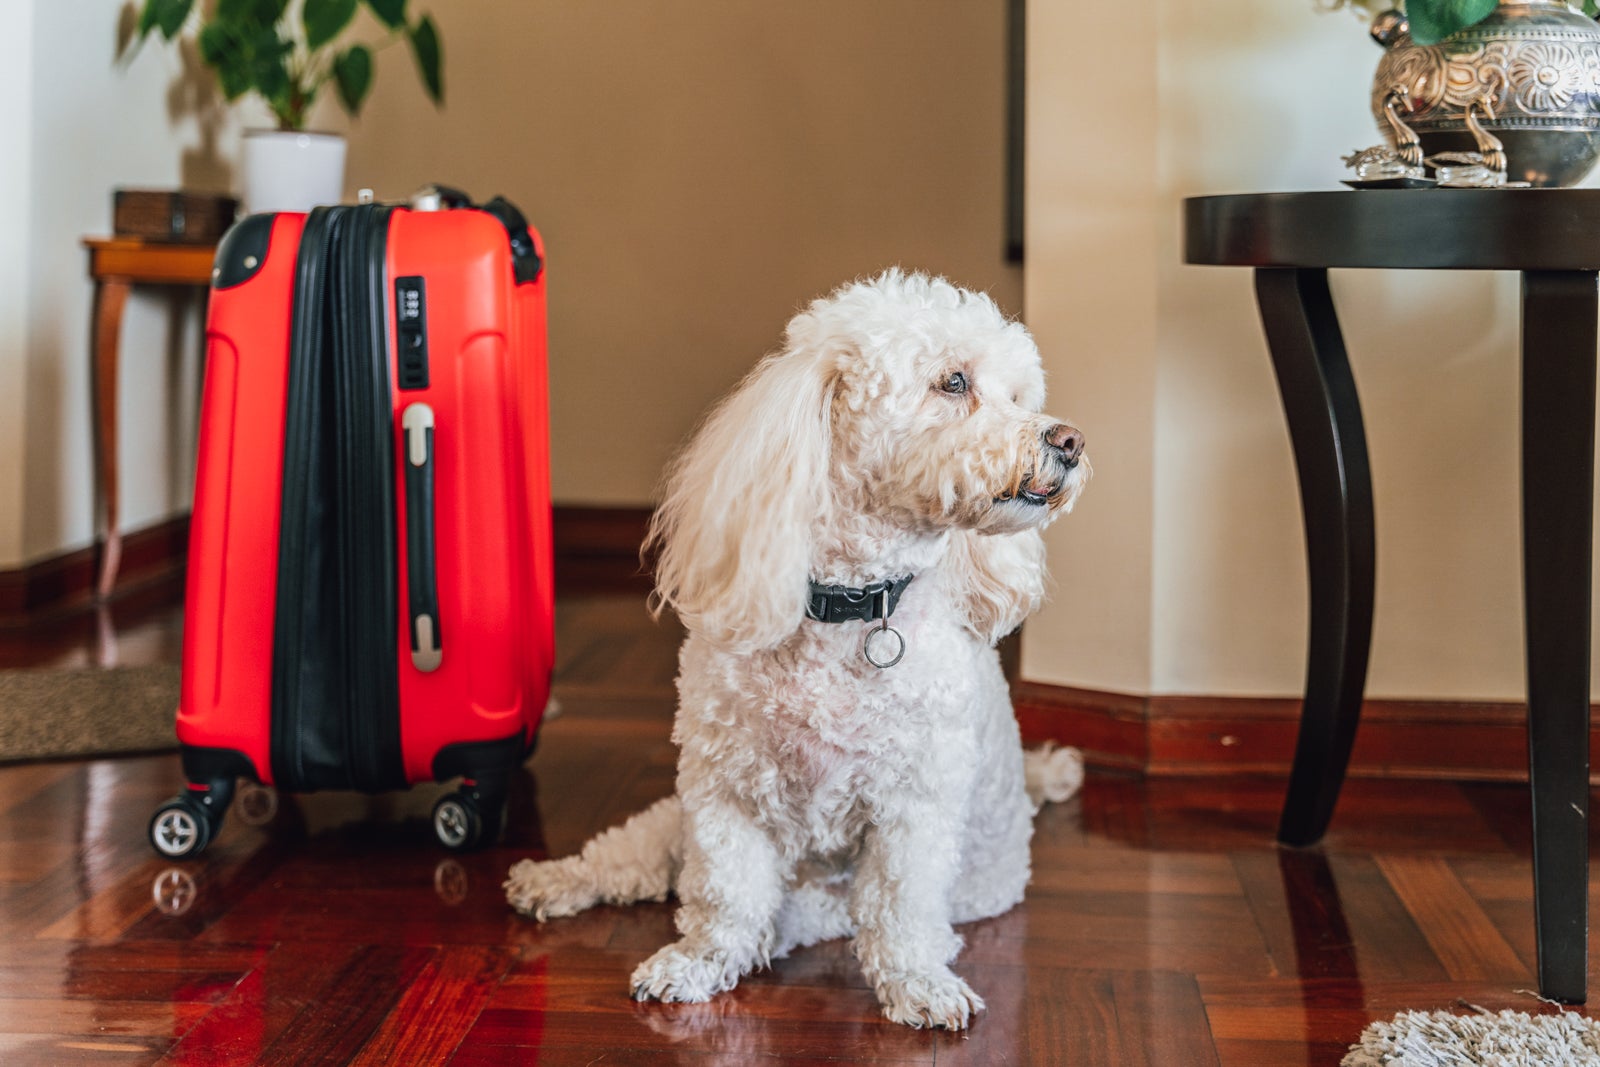 frontier airline pet travel policy